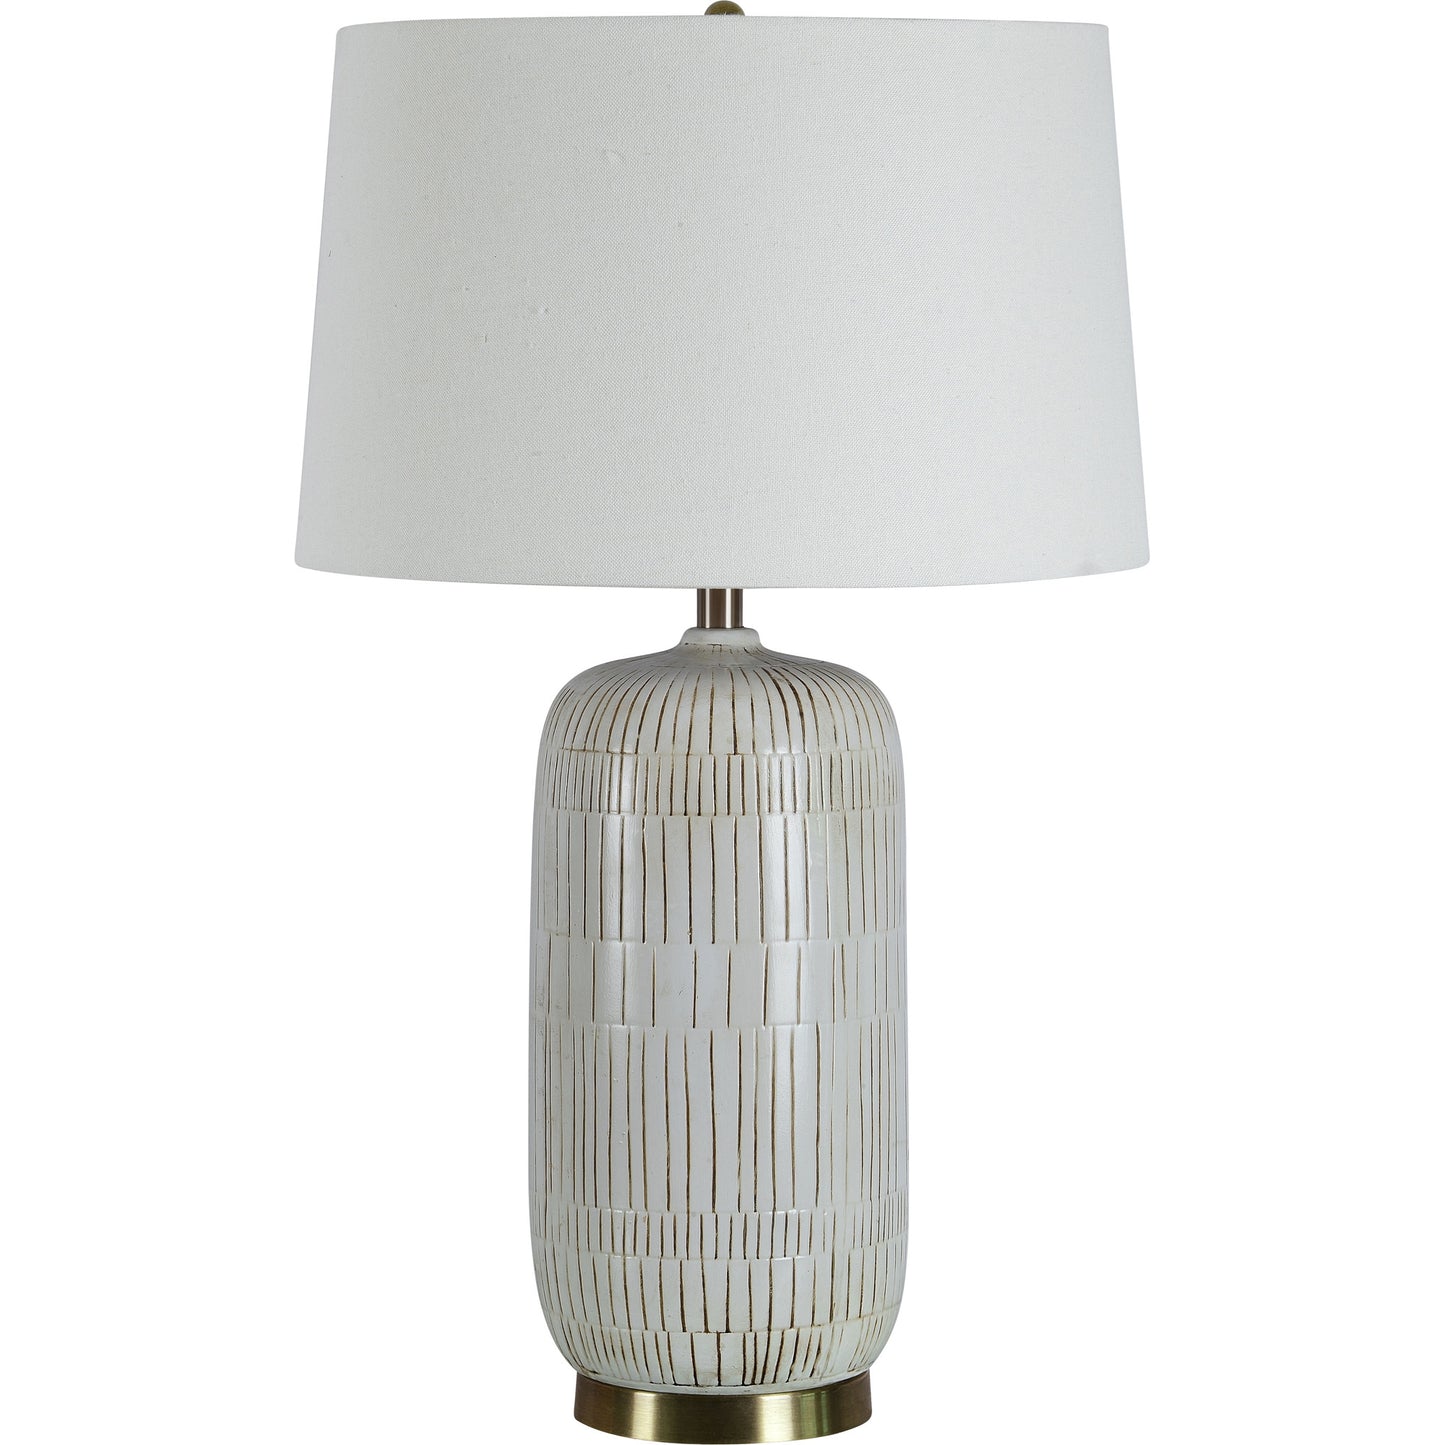 TABLE LAMP PERCY